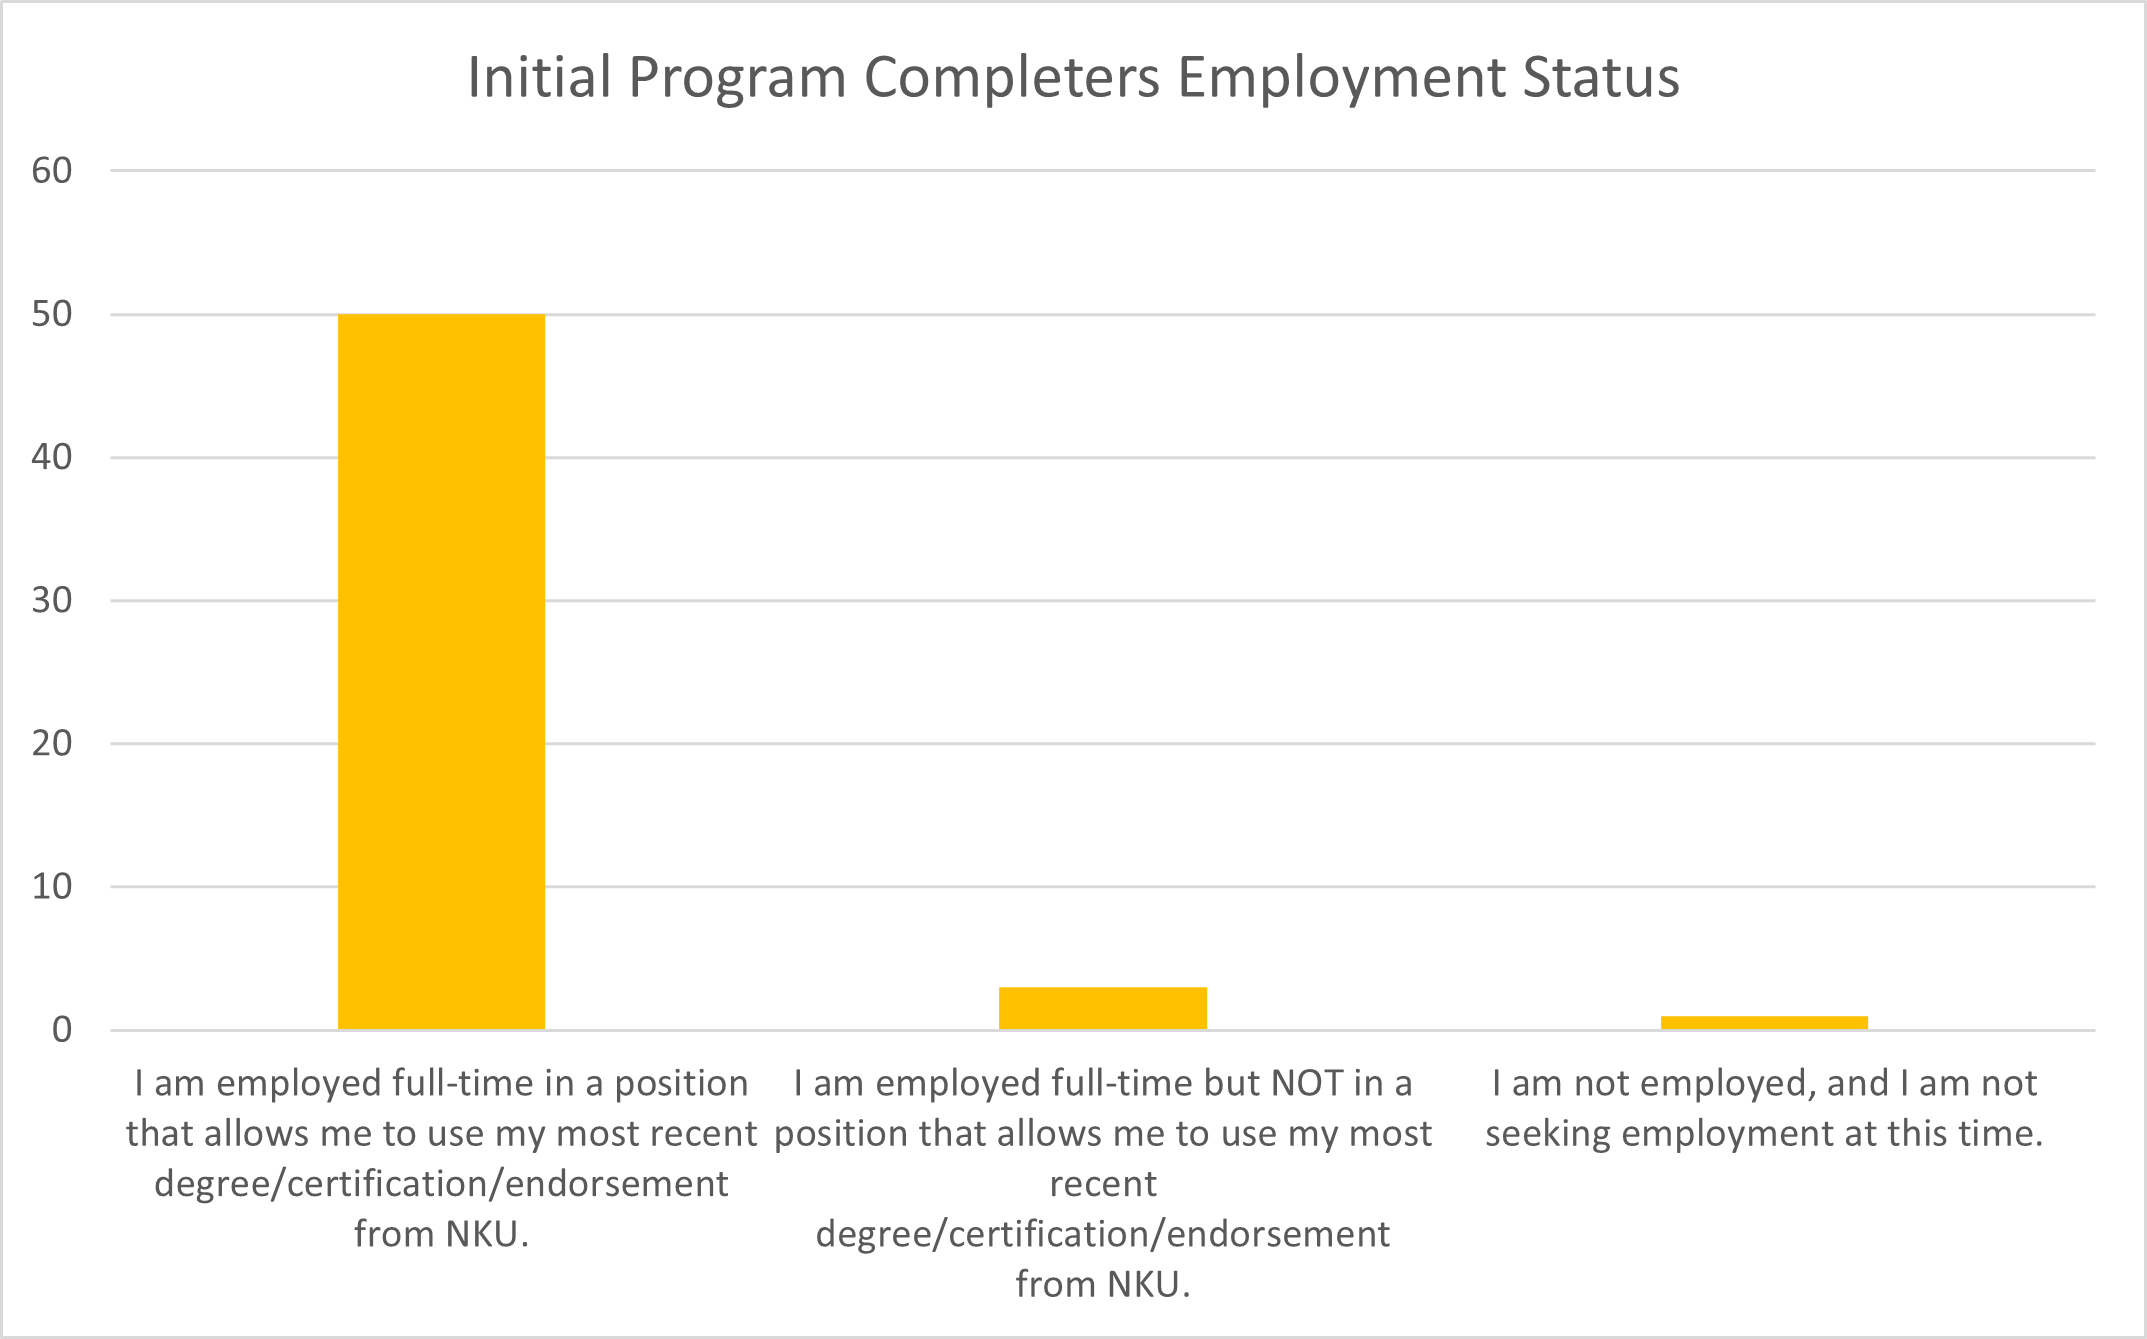 Graphs of employment status of COE initial program completers